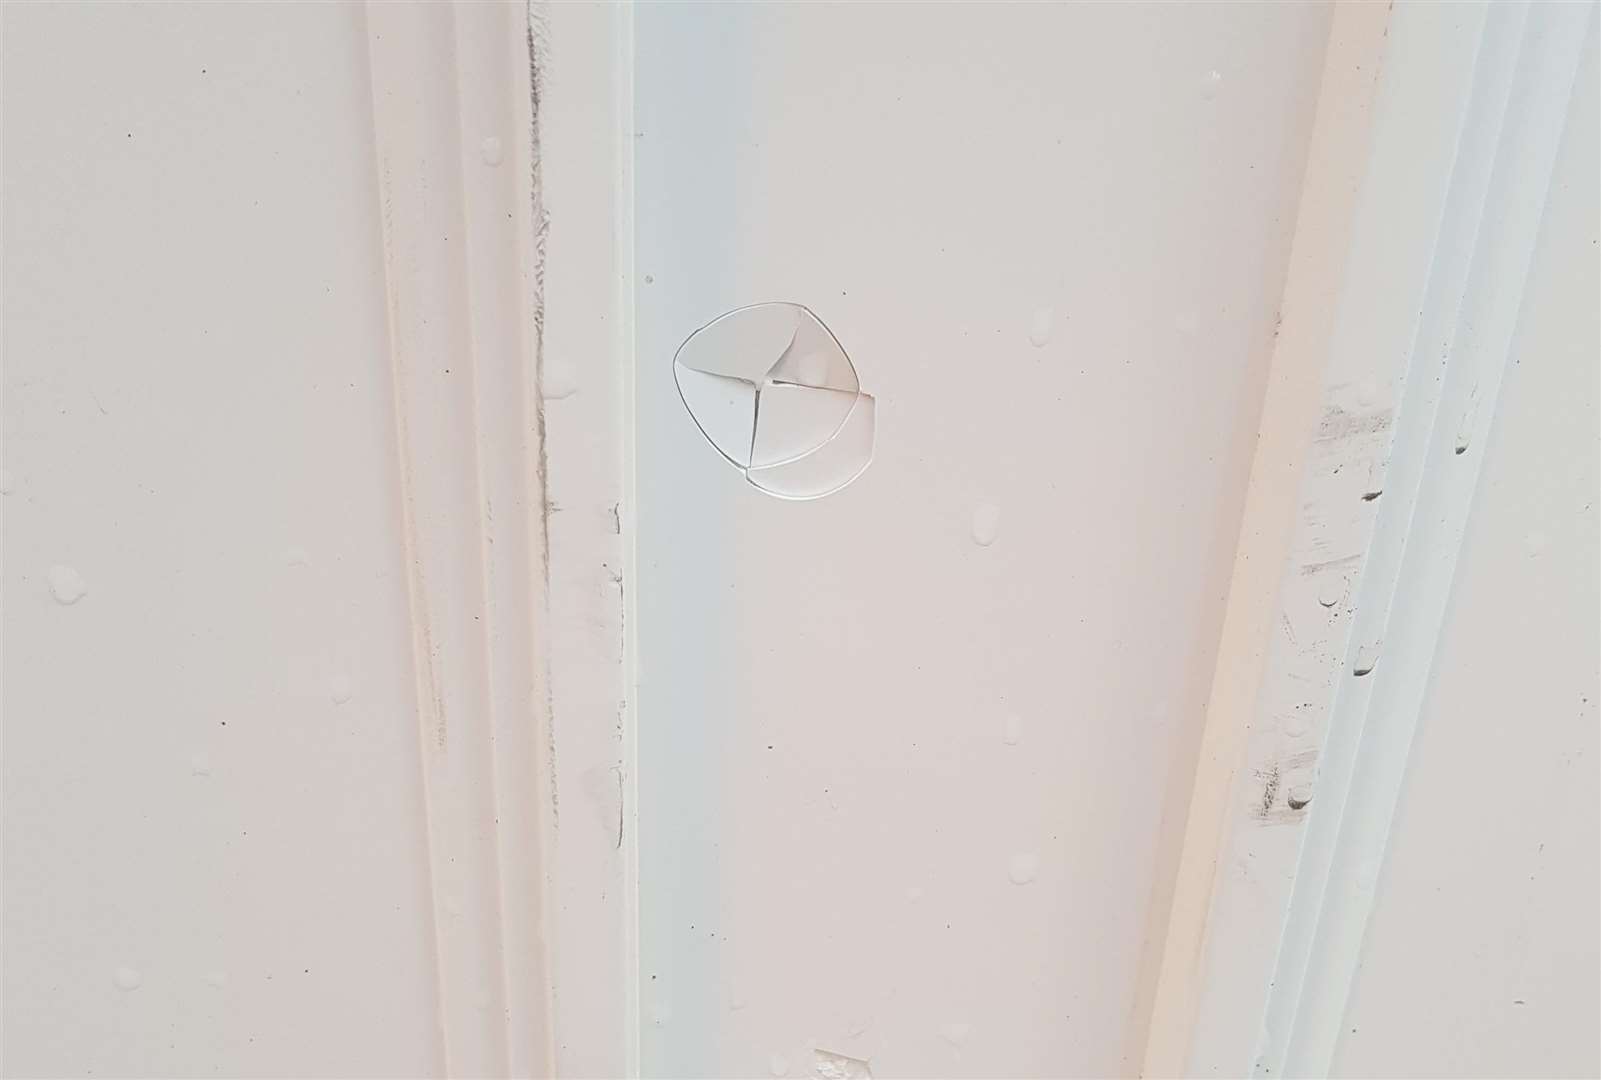 Damage to the couple's door